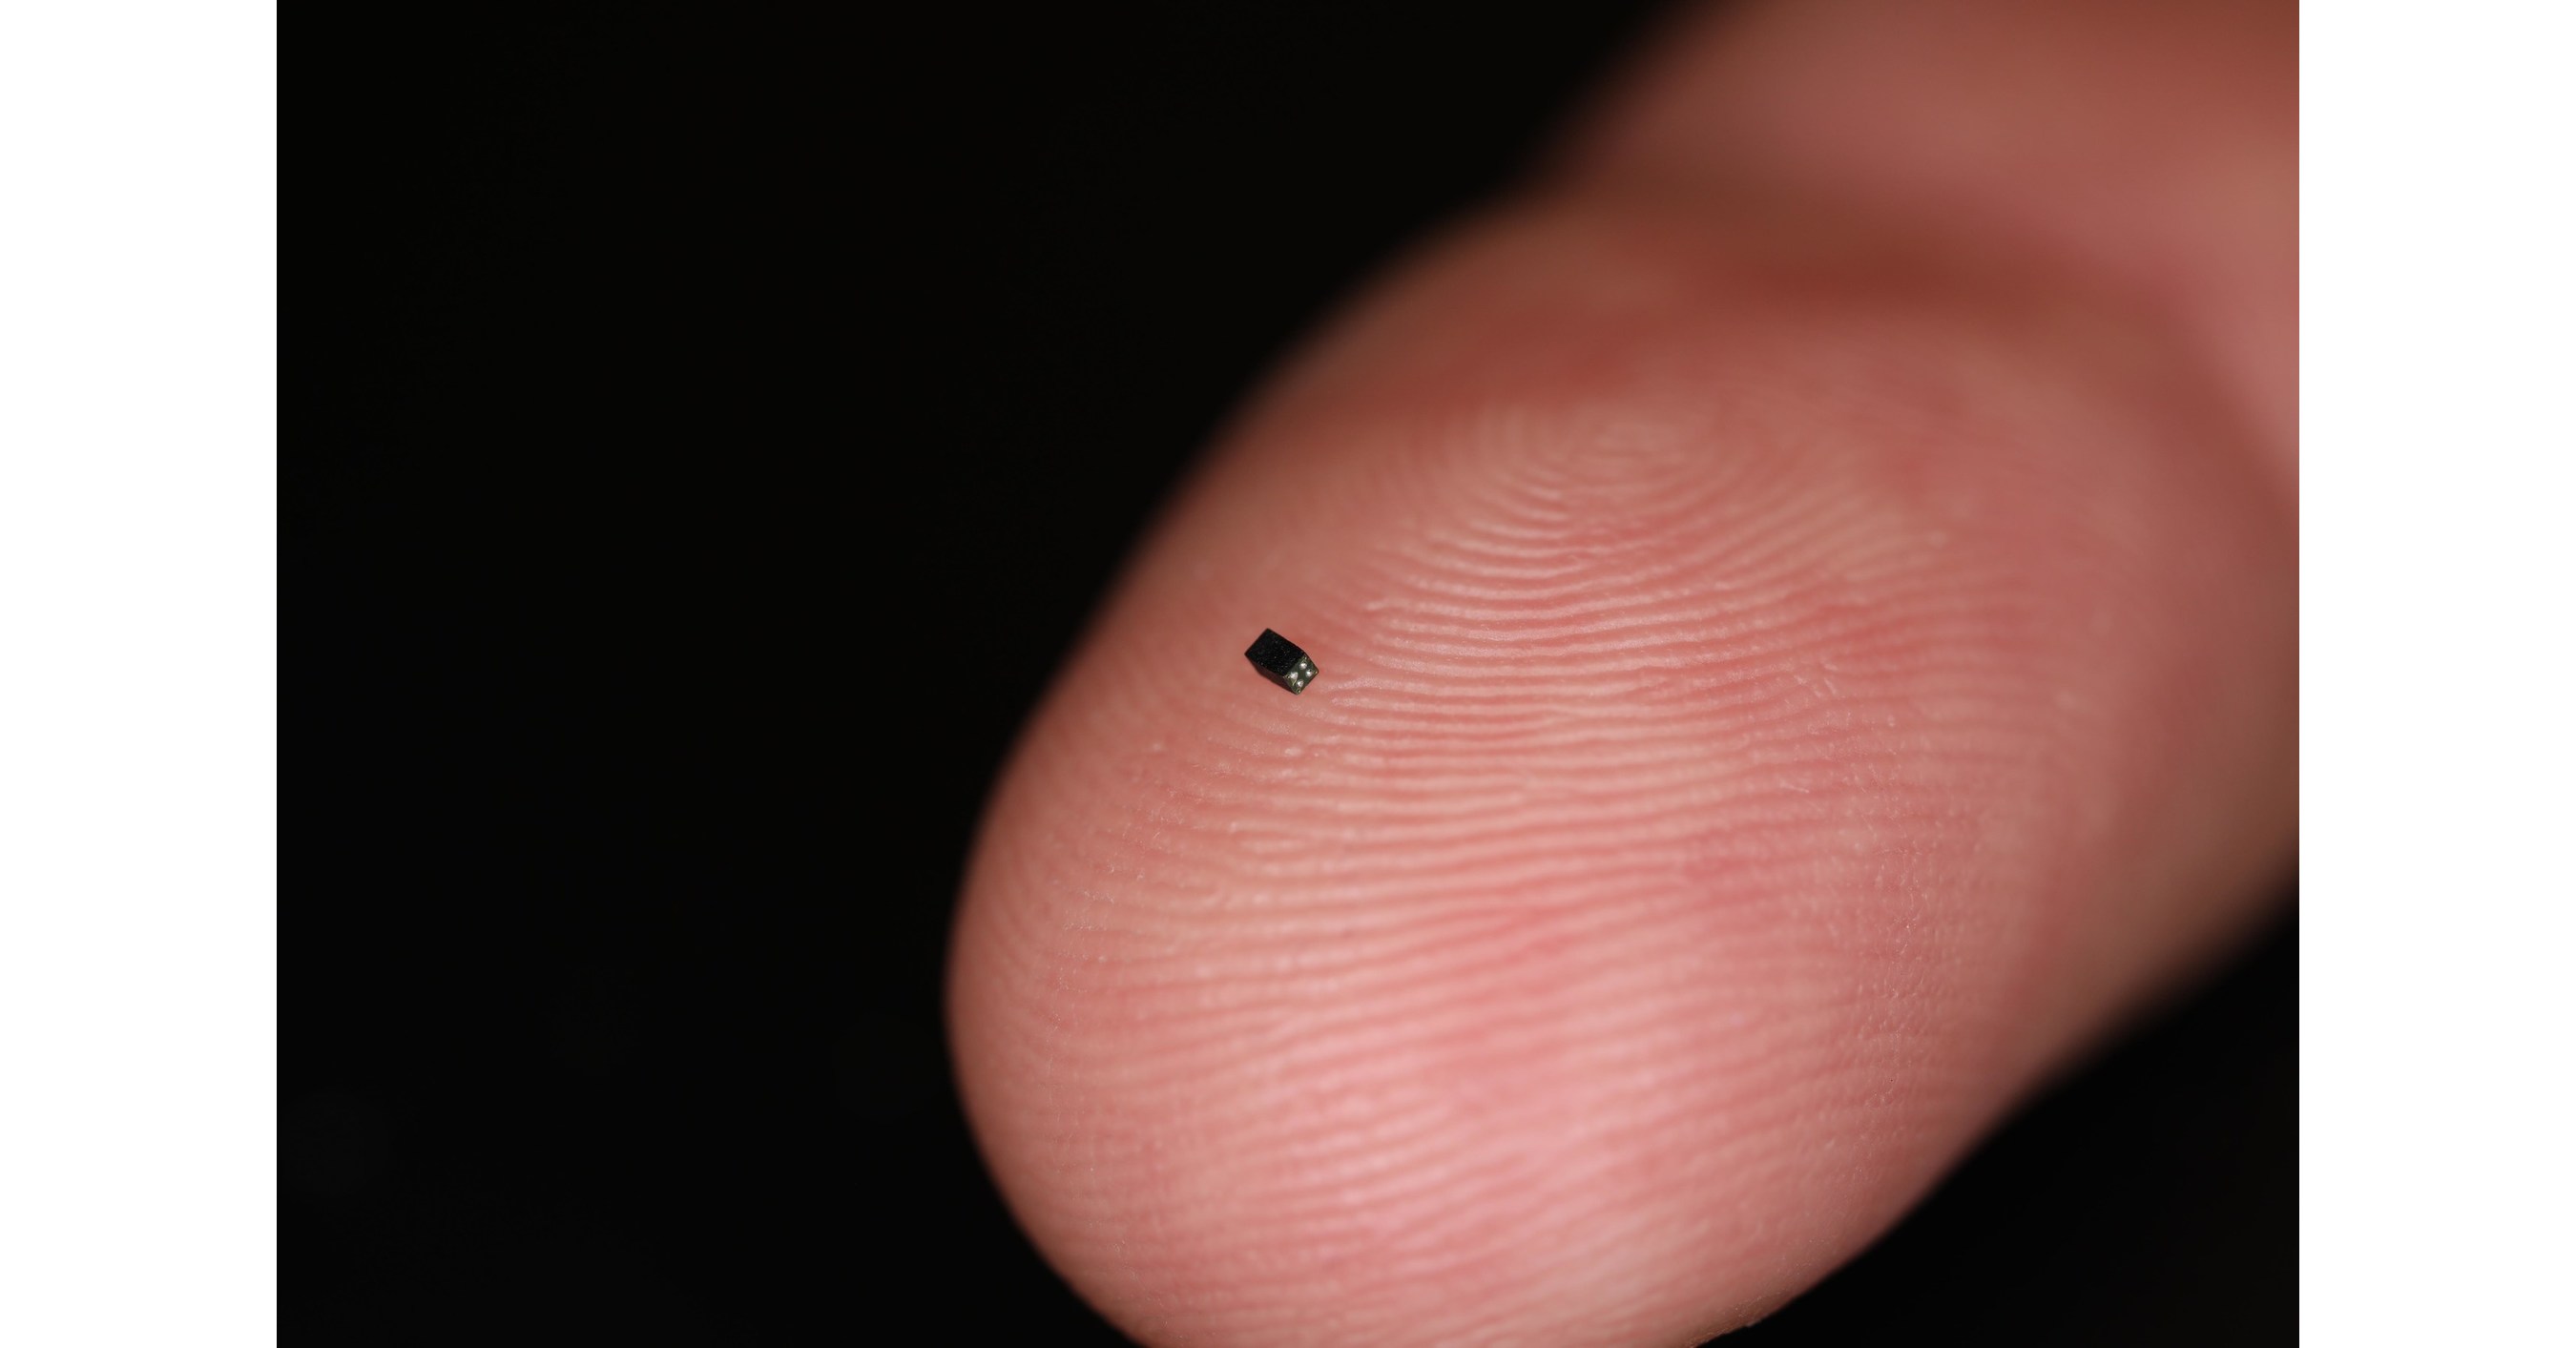 OMNIVISION Announces Guinness World Record for Smallest Image